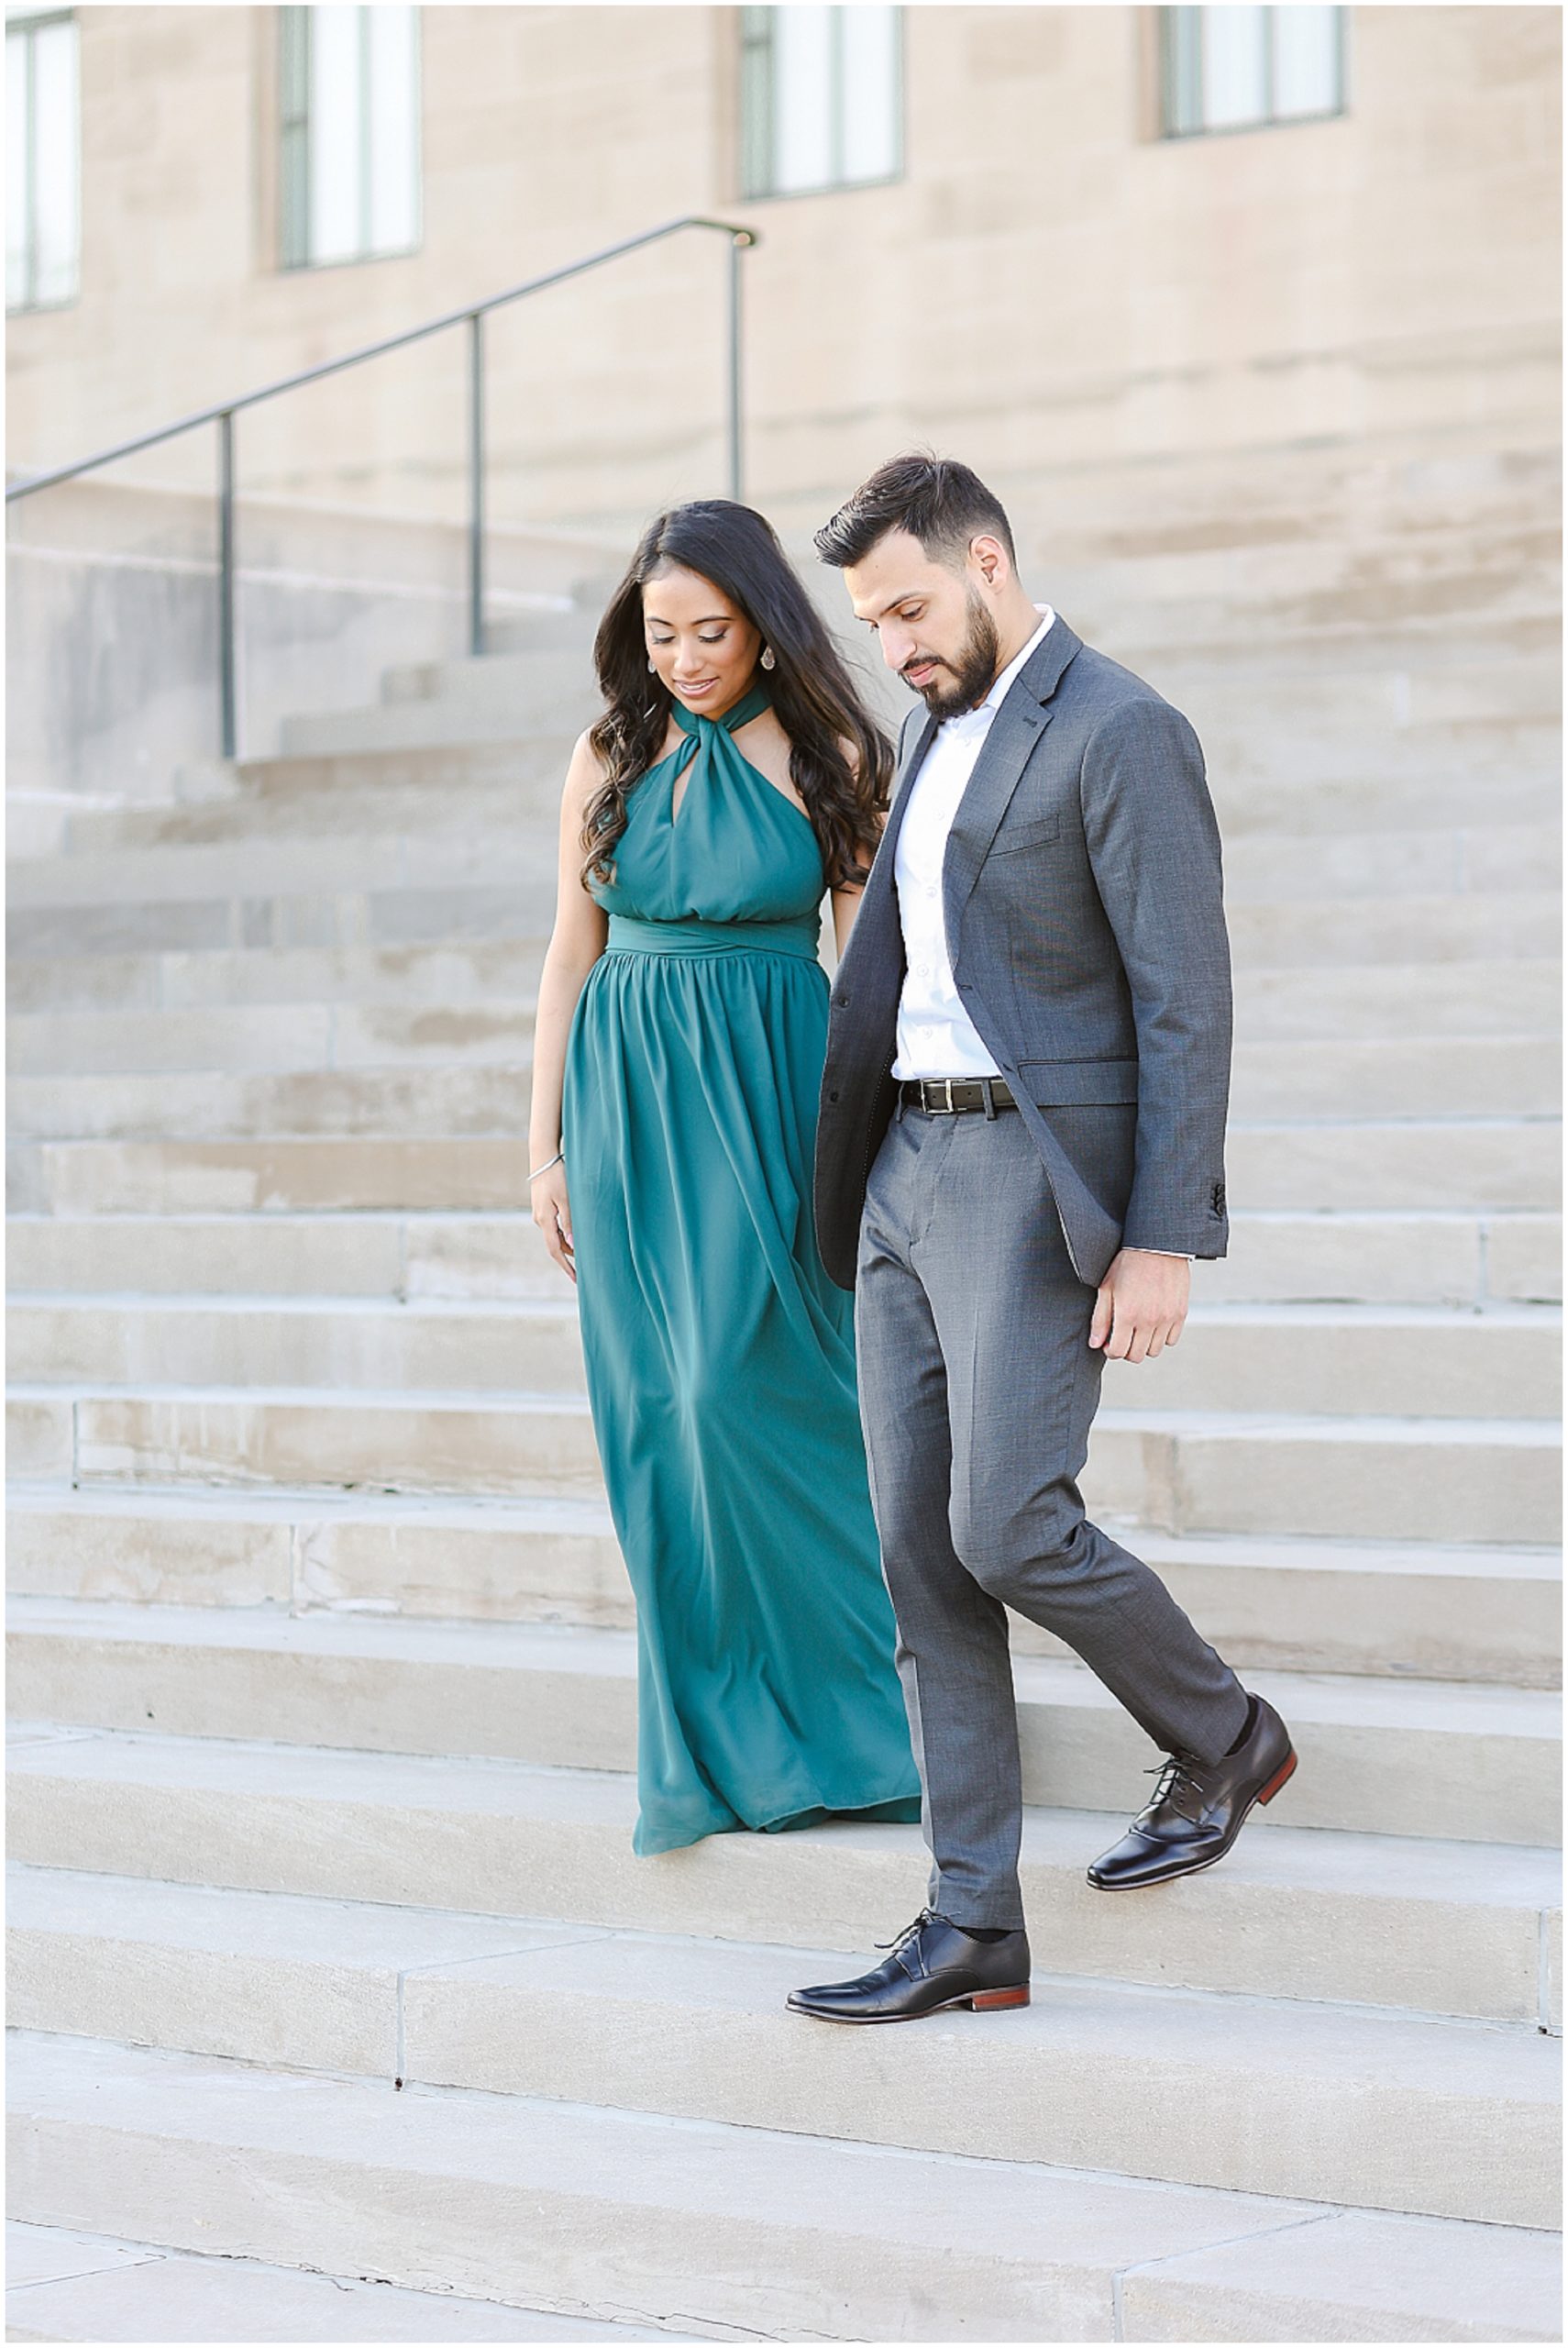 walking down the stairs - Spring Engagement Session in Kansas City - What to wear for portraits - where to take your engagement photos - mariam saifan photography - kaman and byrant indian engagement photos  - stl and florida wedding photographer for indian weddings